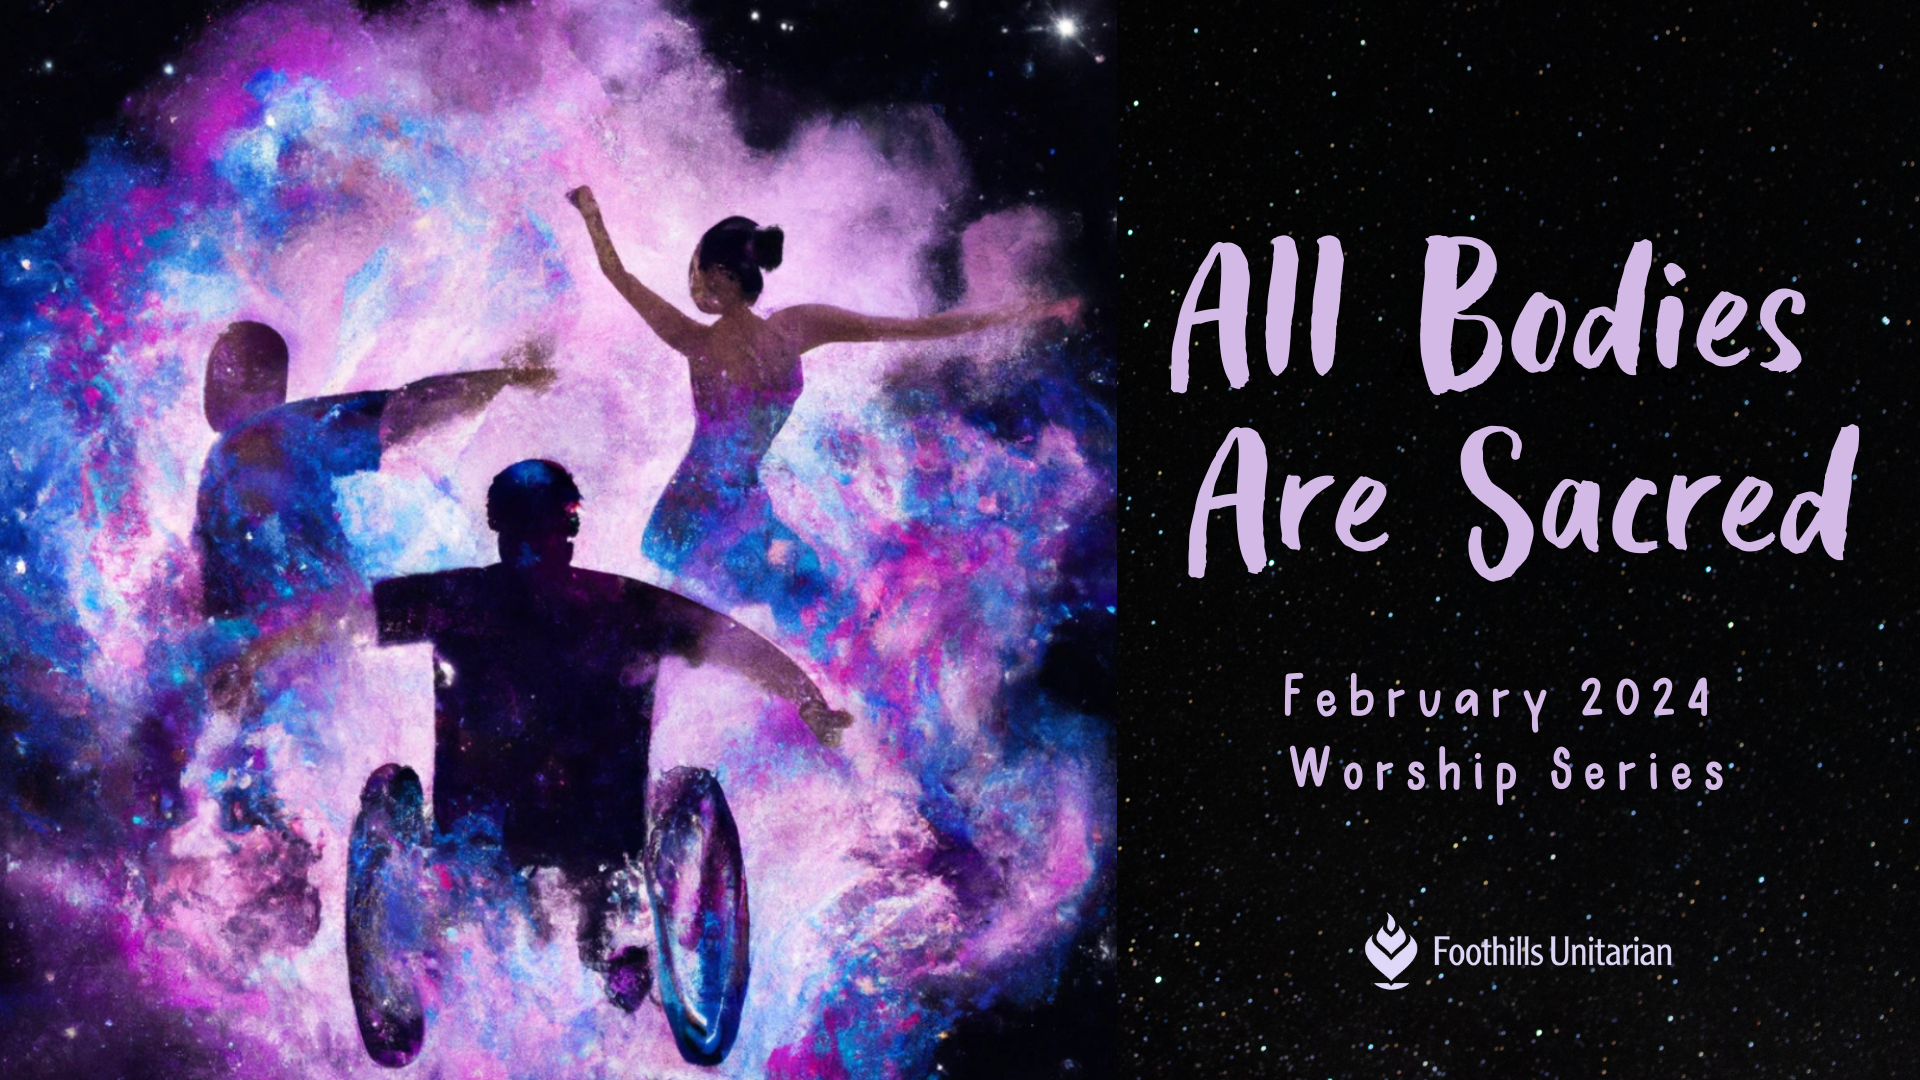 All Bodies Are Sacred: February 2024 Series Invitation